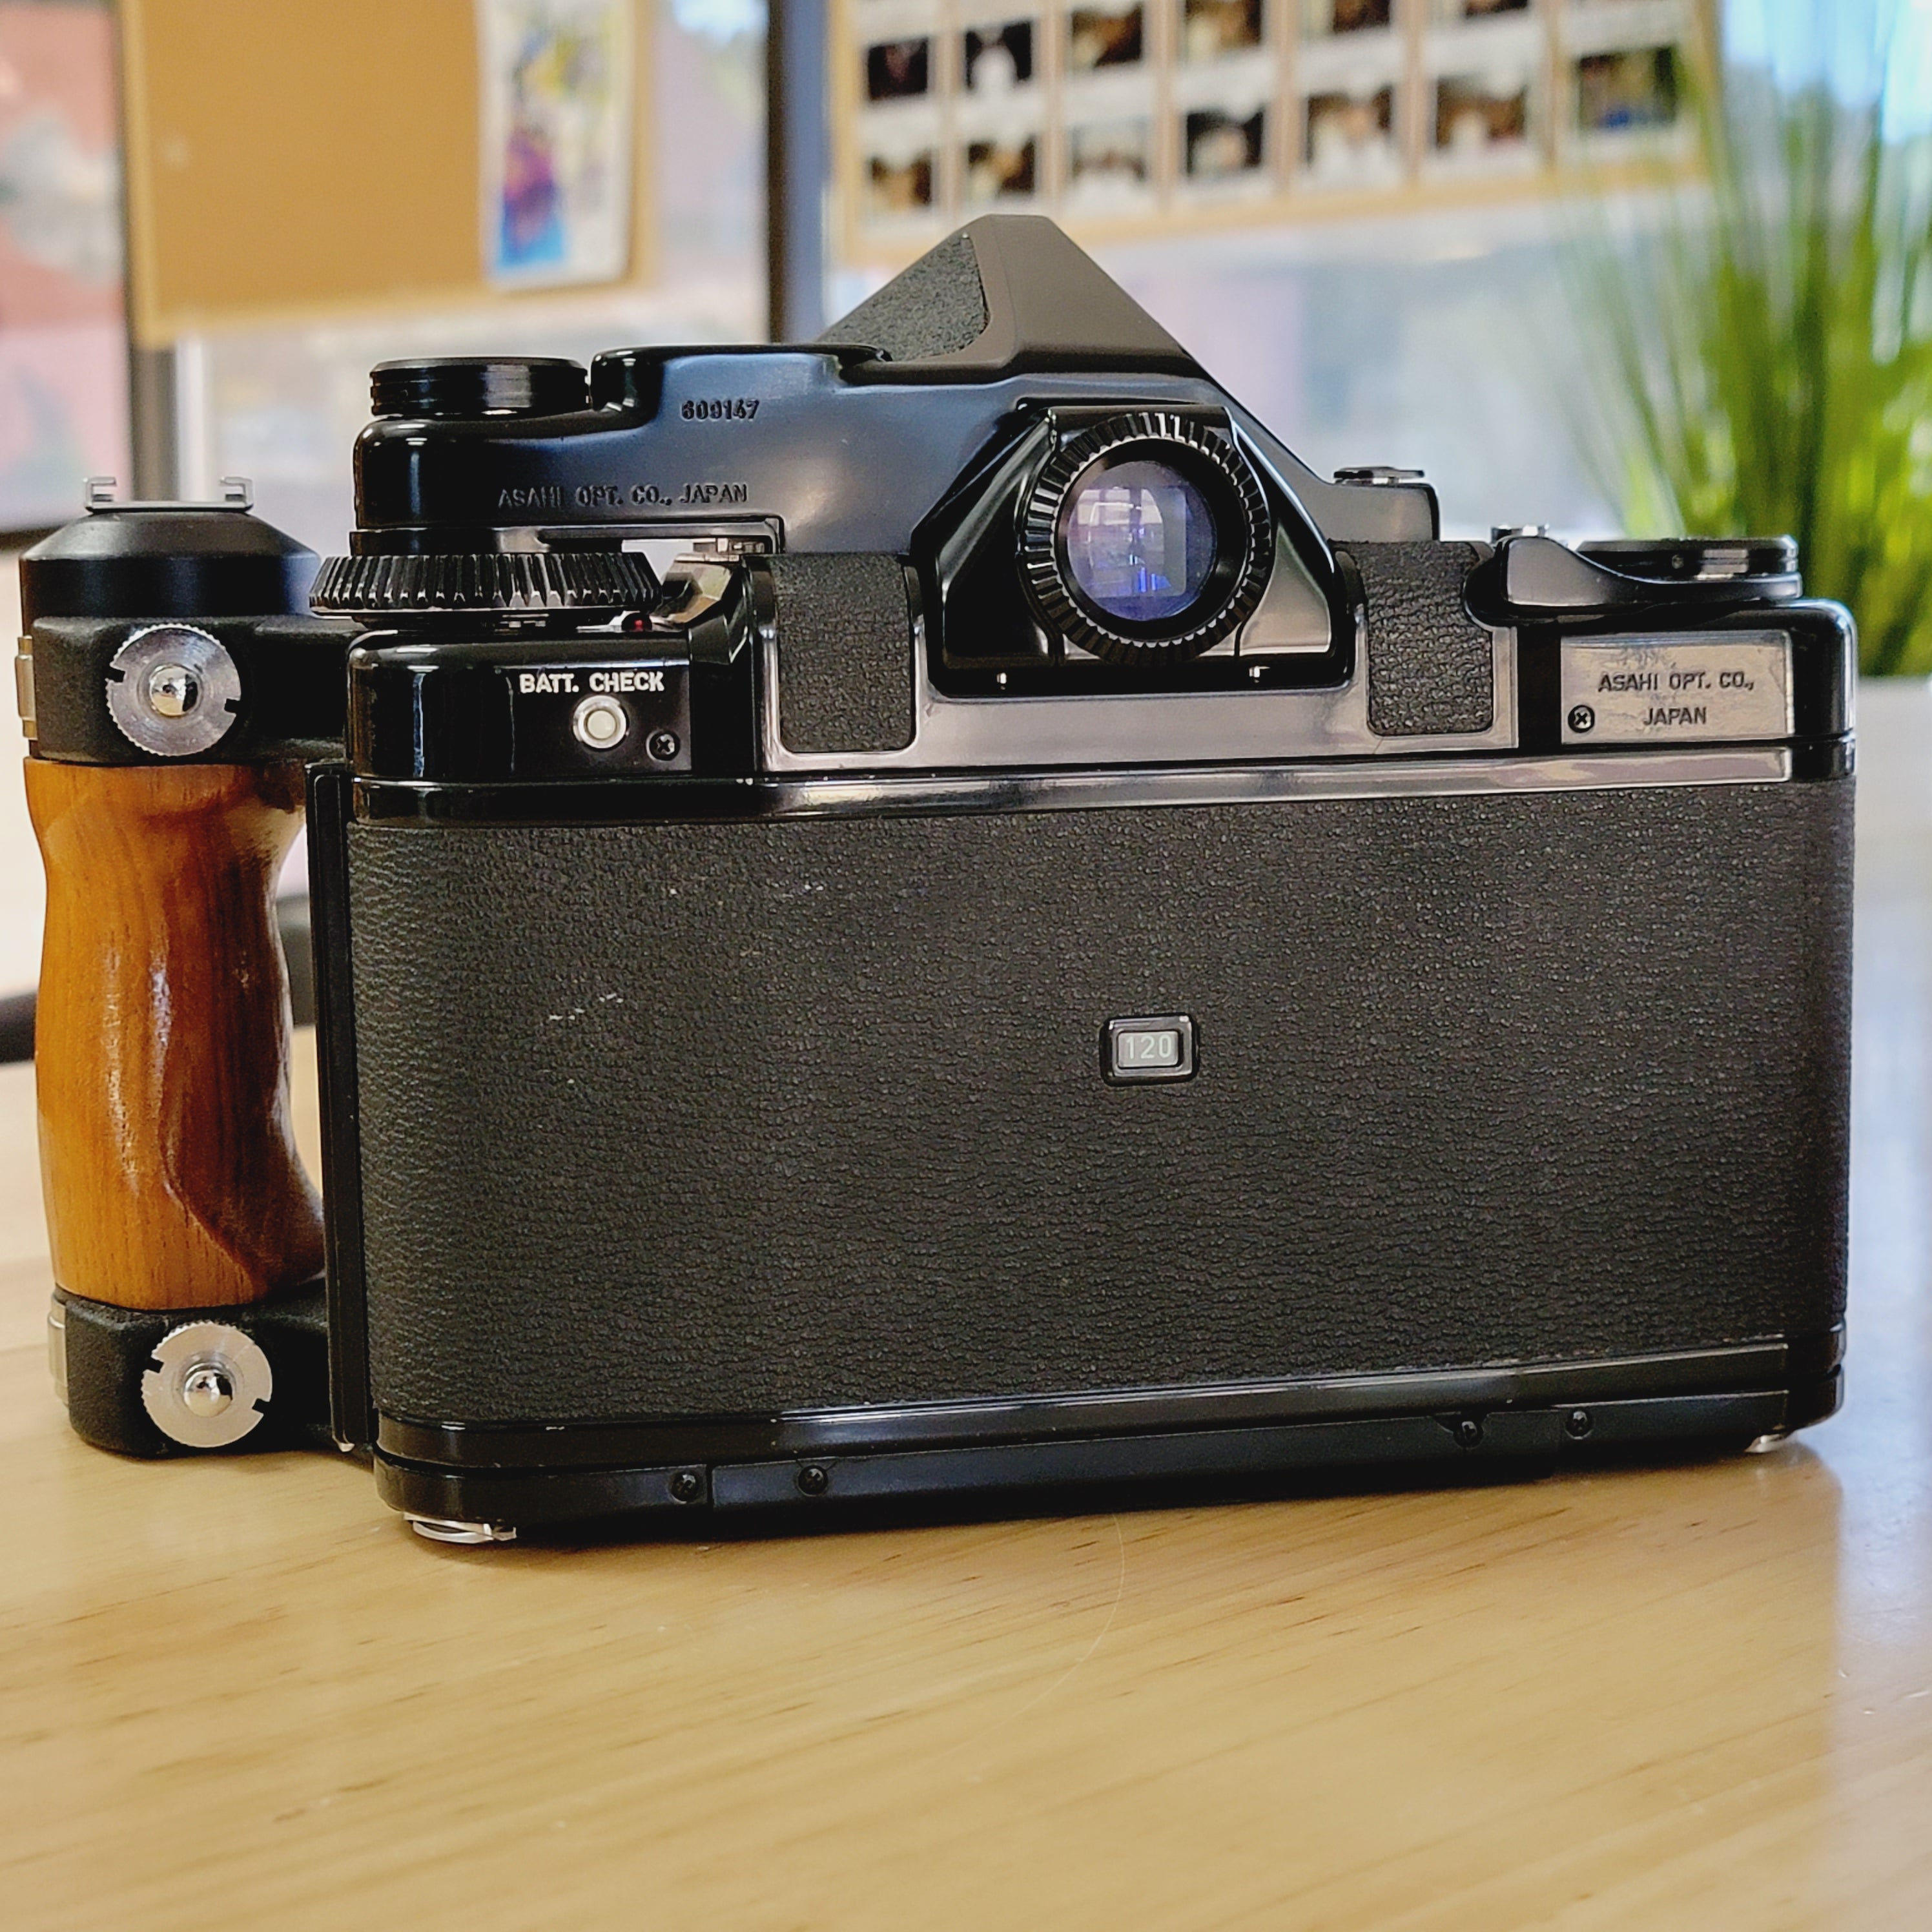 Pentax 67 Body (Late) with metered viewfinder, grips and 75mm f/4.5 Lens